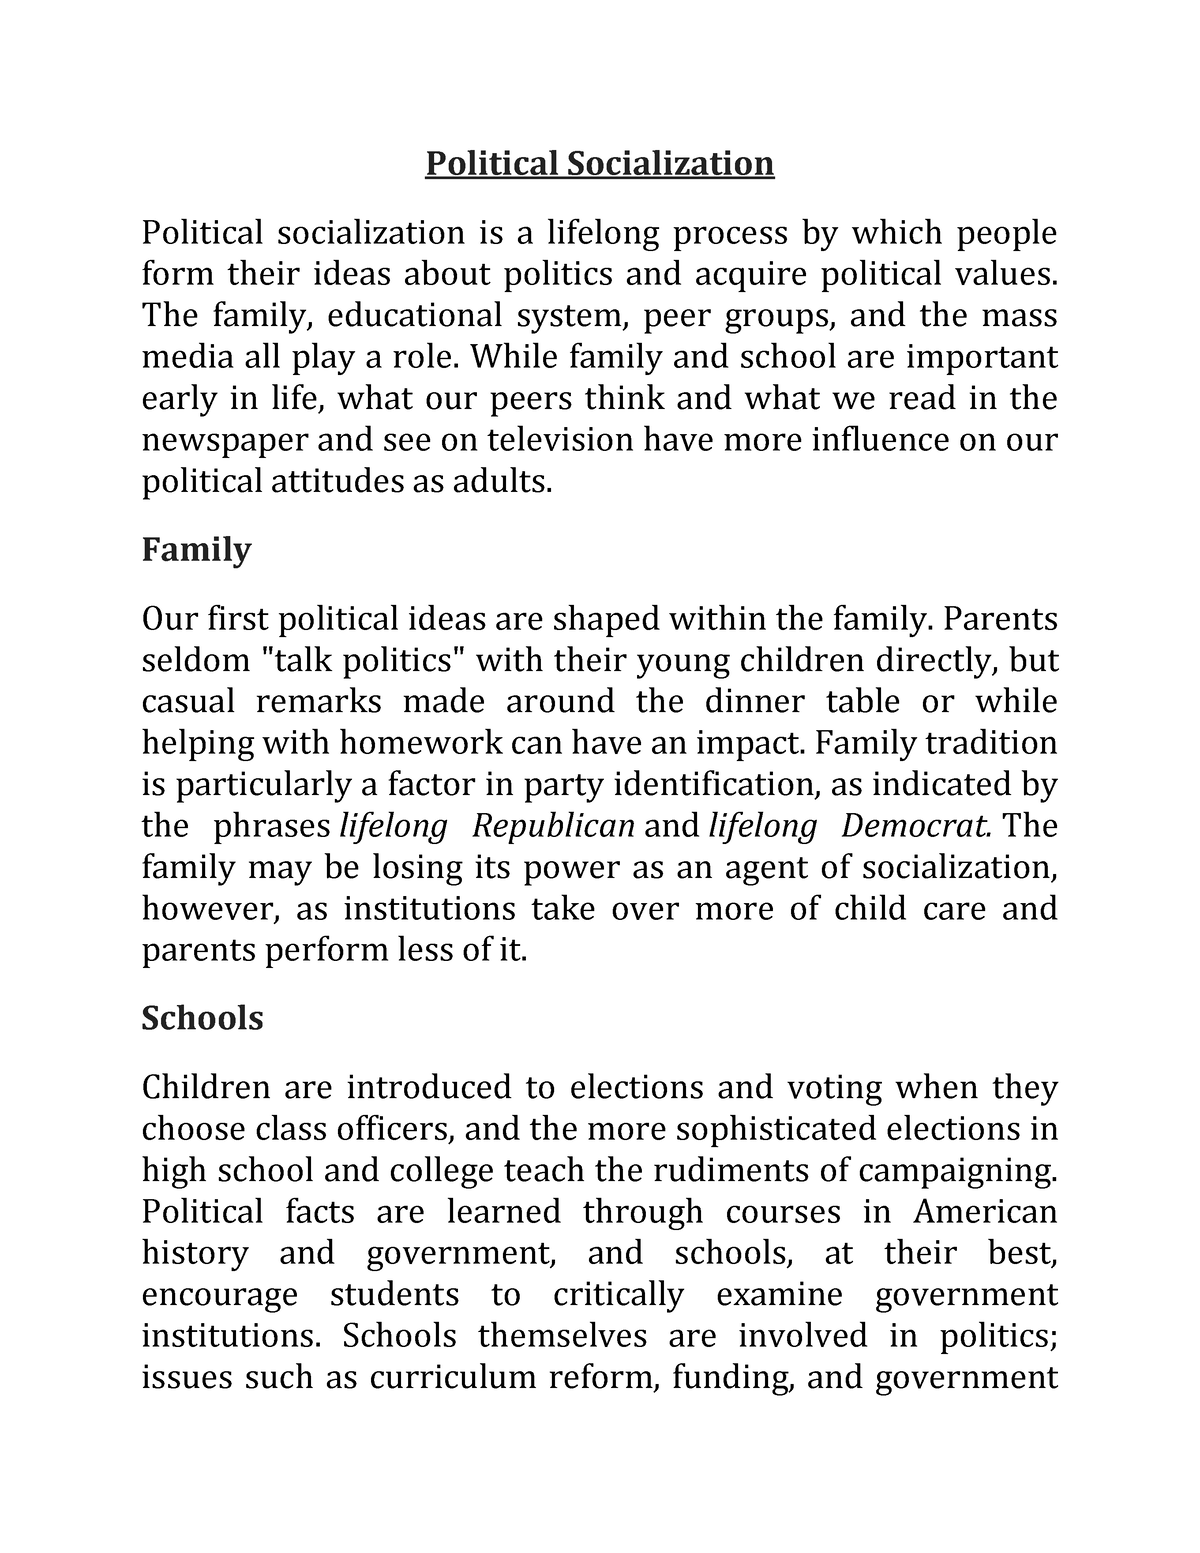 literature review of political socialization